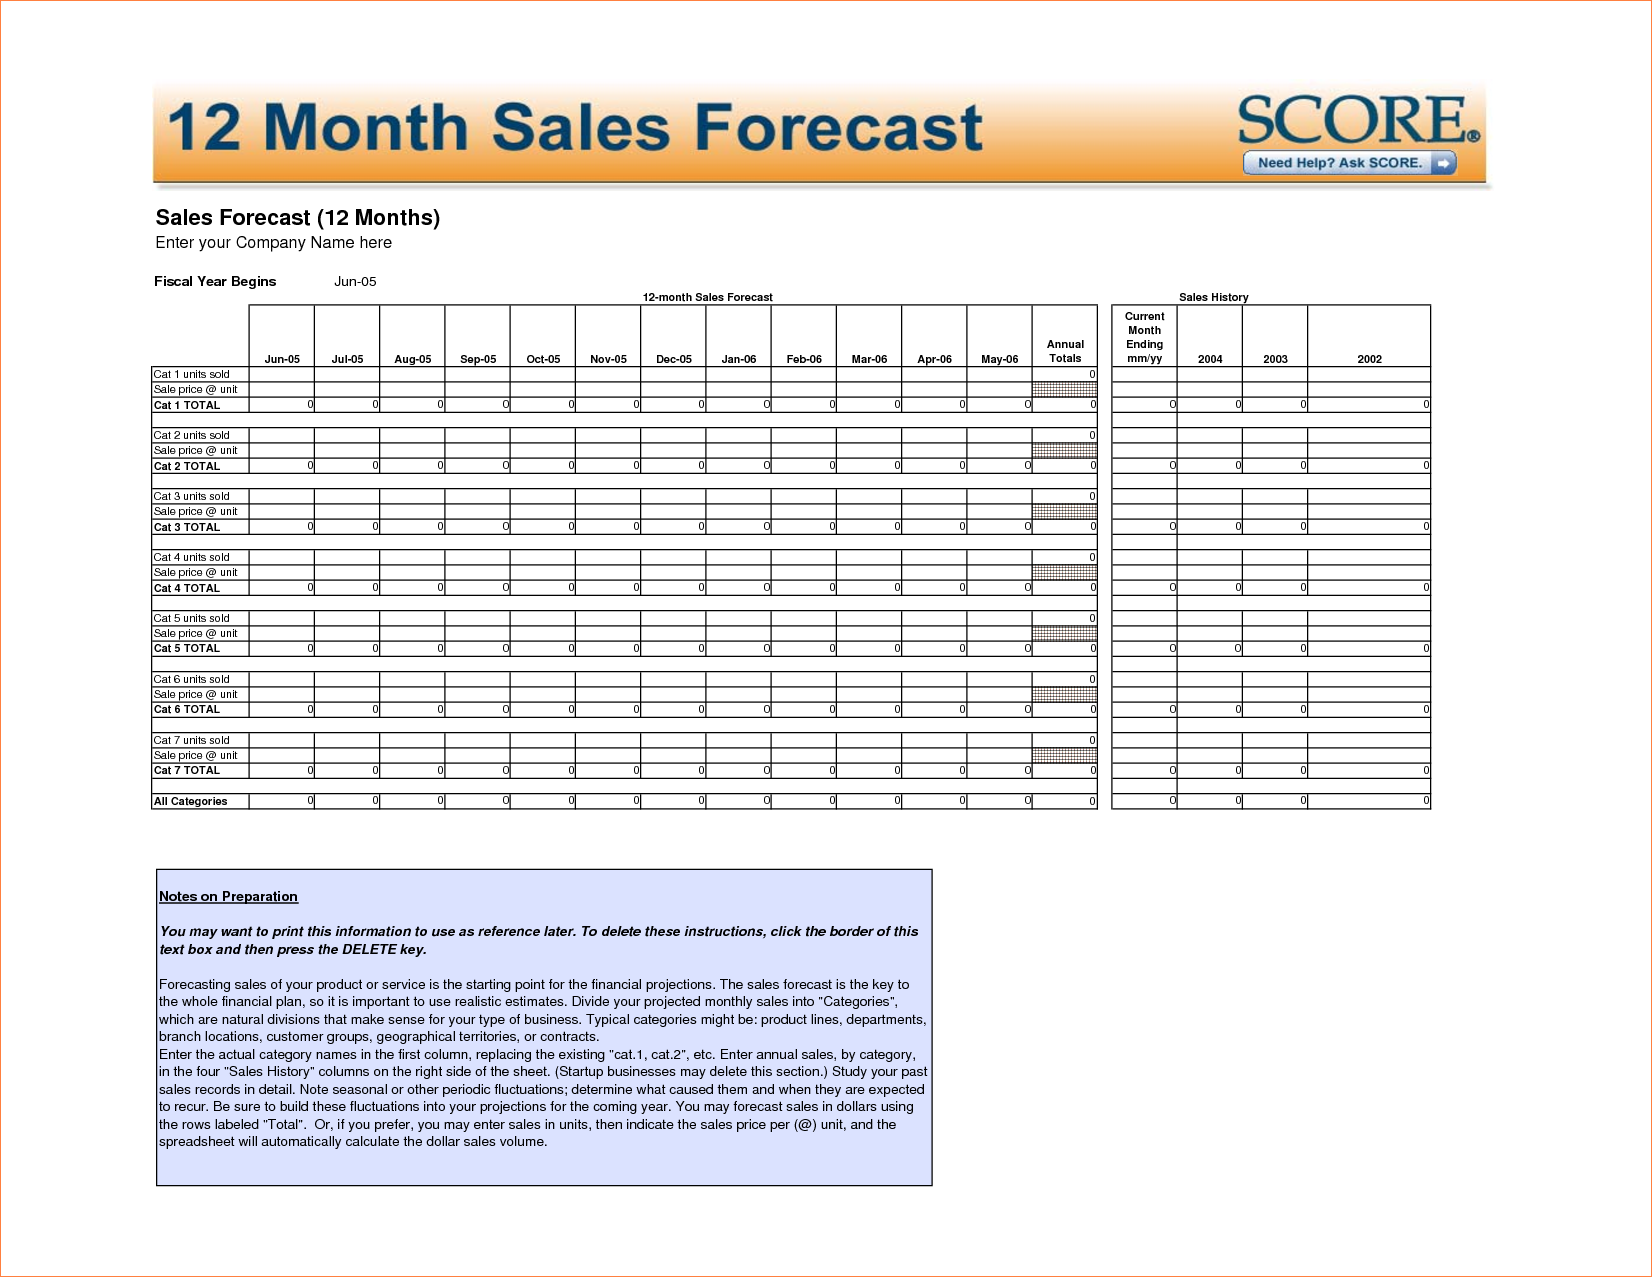 Sales Forecast Spreadsheet Template Db excel